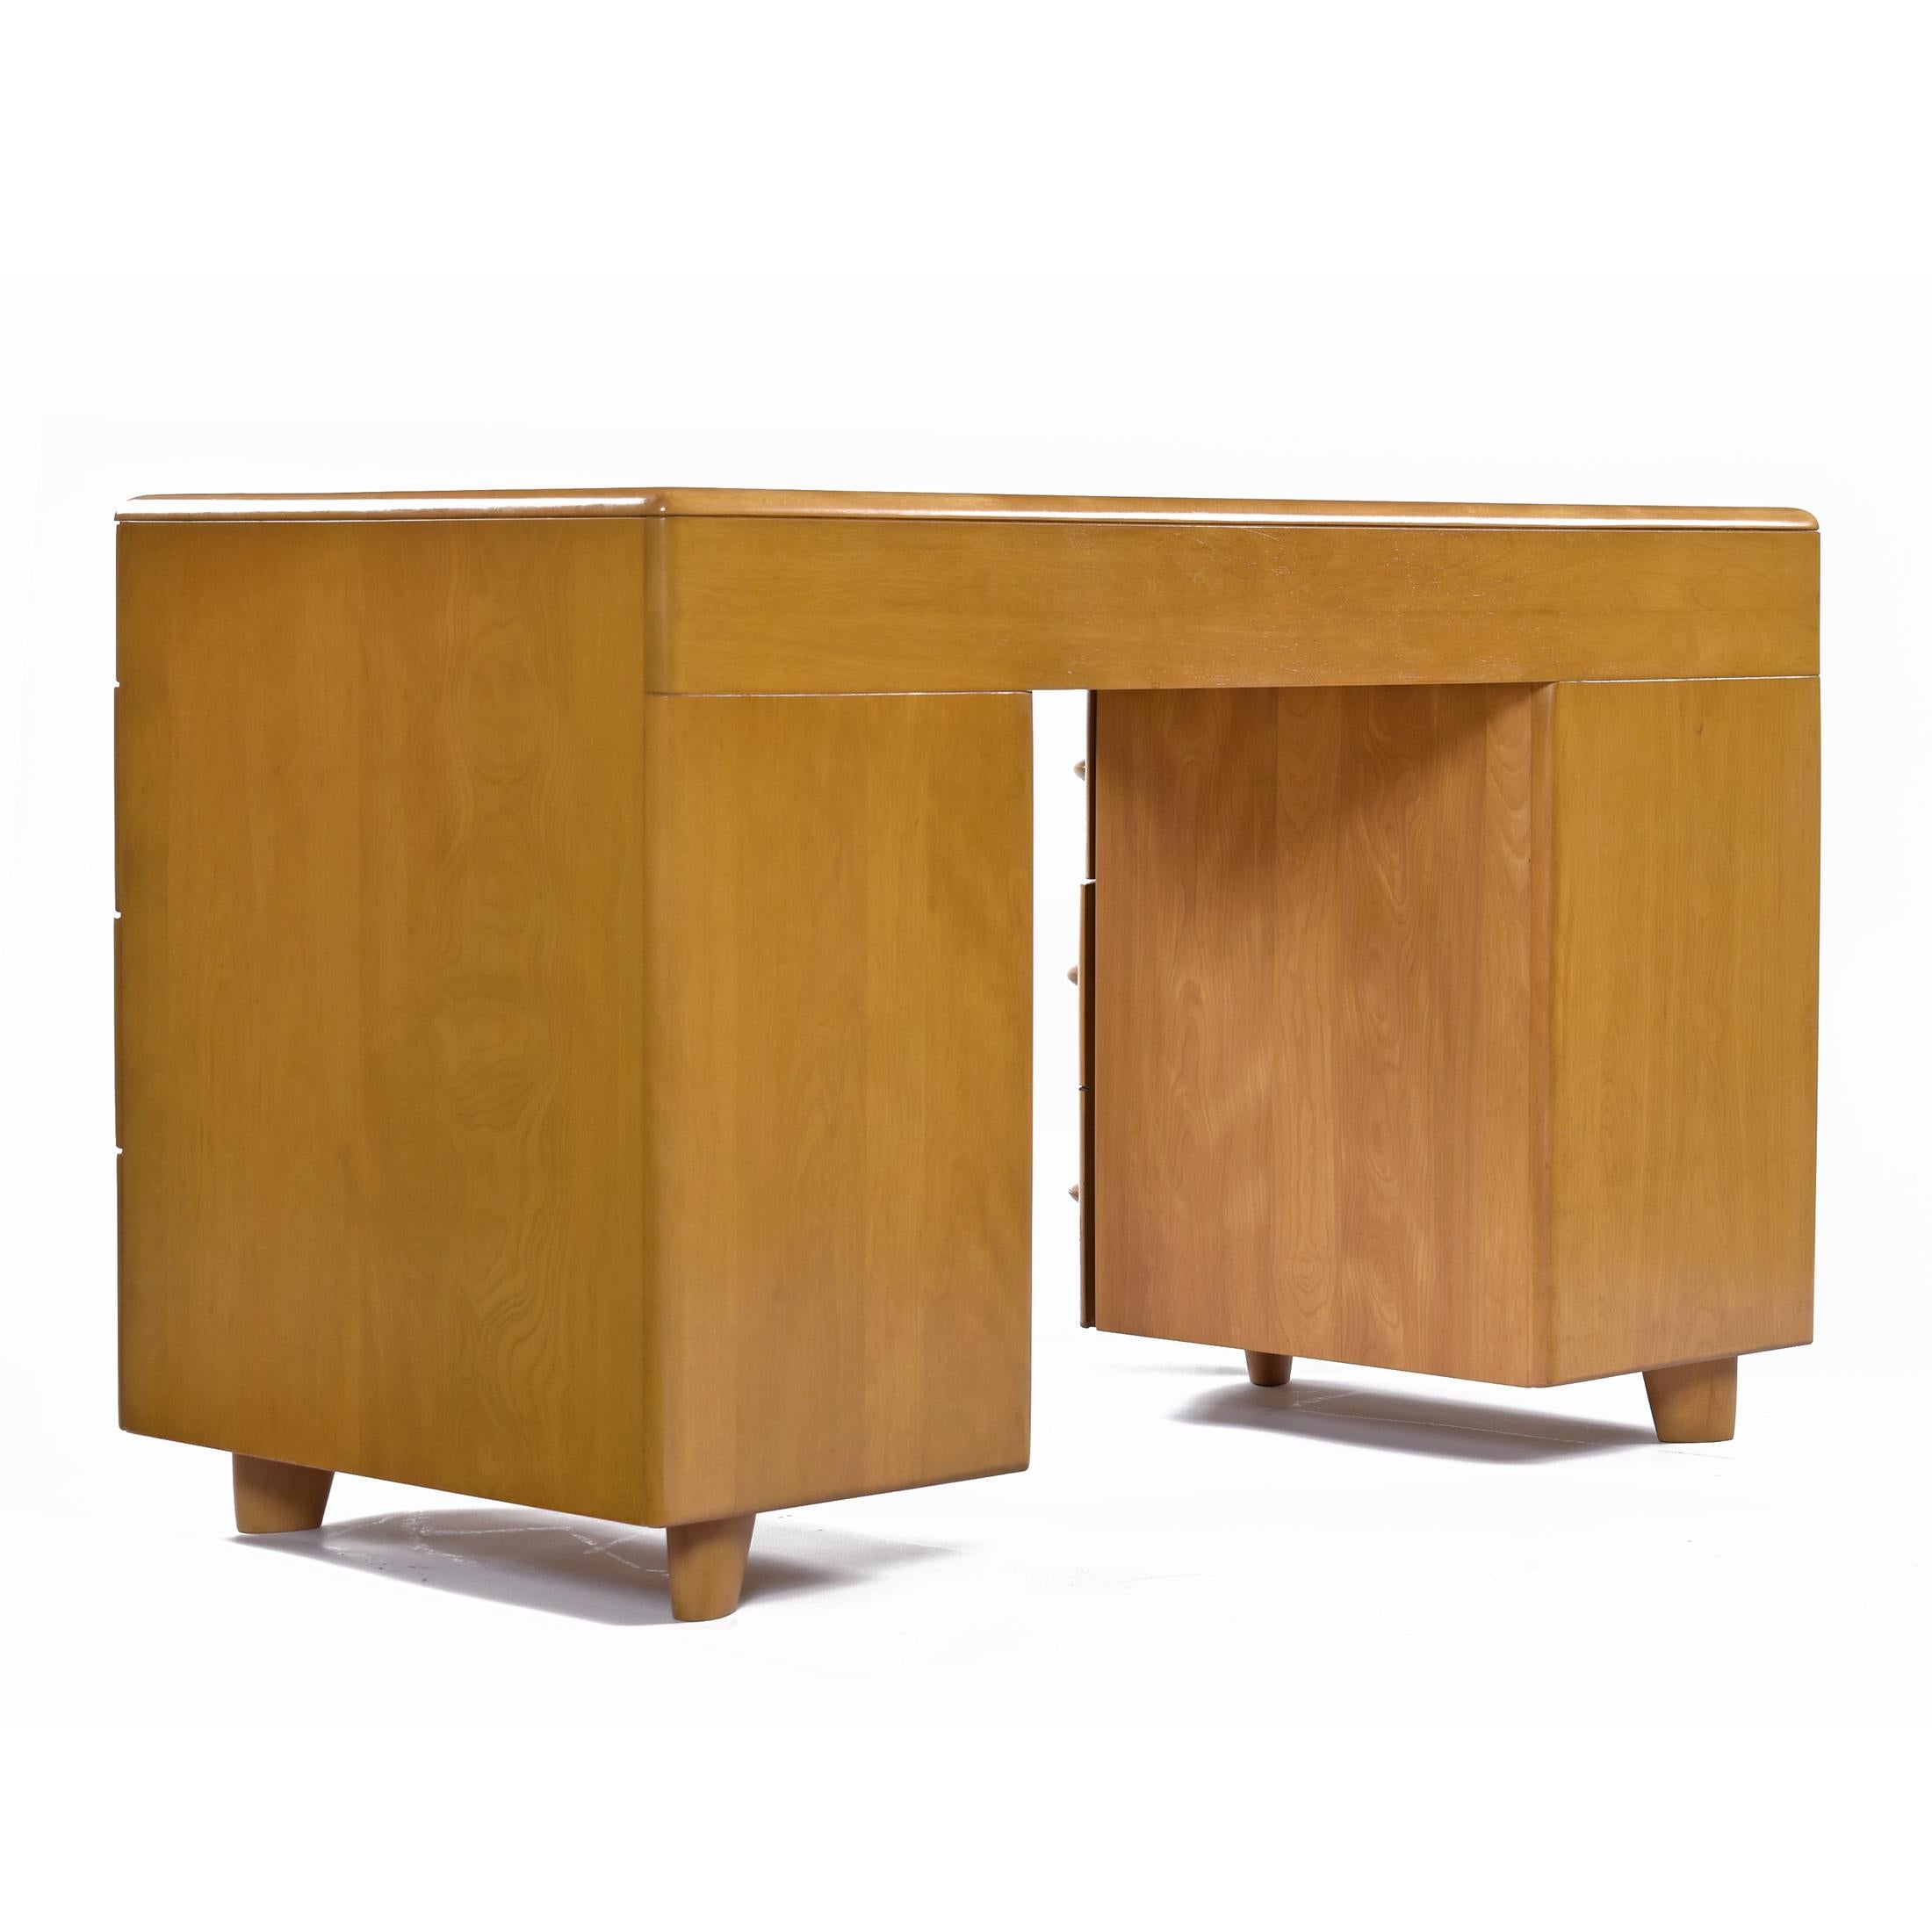 This listing includes both the desk and chair.  

Collectors know that it is difficult to find original Heywood in good condition.  The desk top has been refinished to match original specs in Heywood Wakefield wheat. This sleek, study, understated